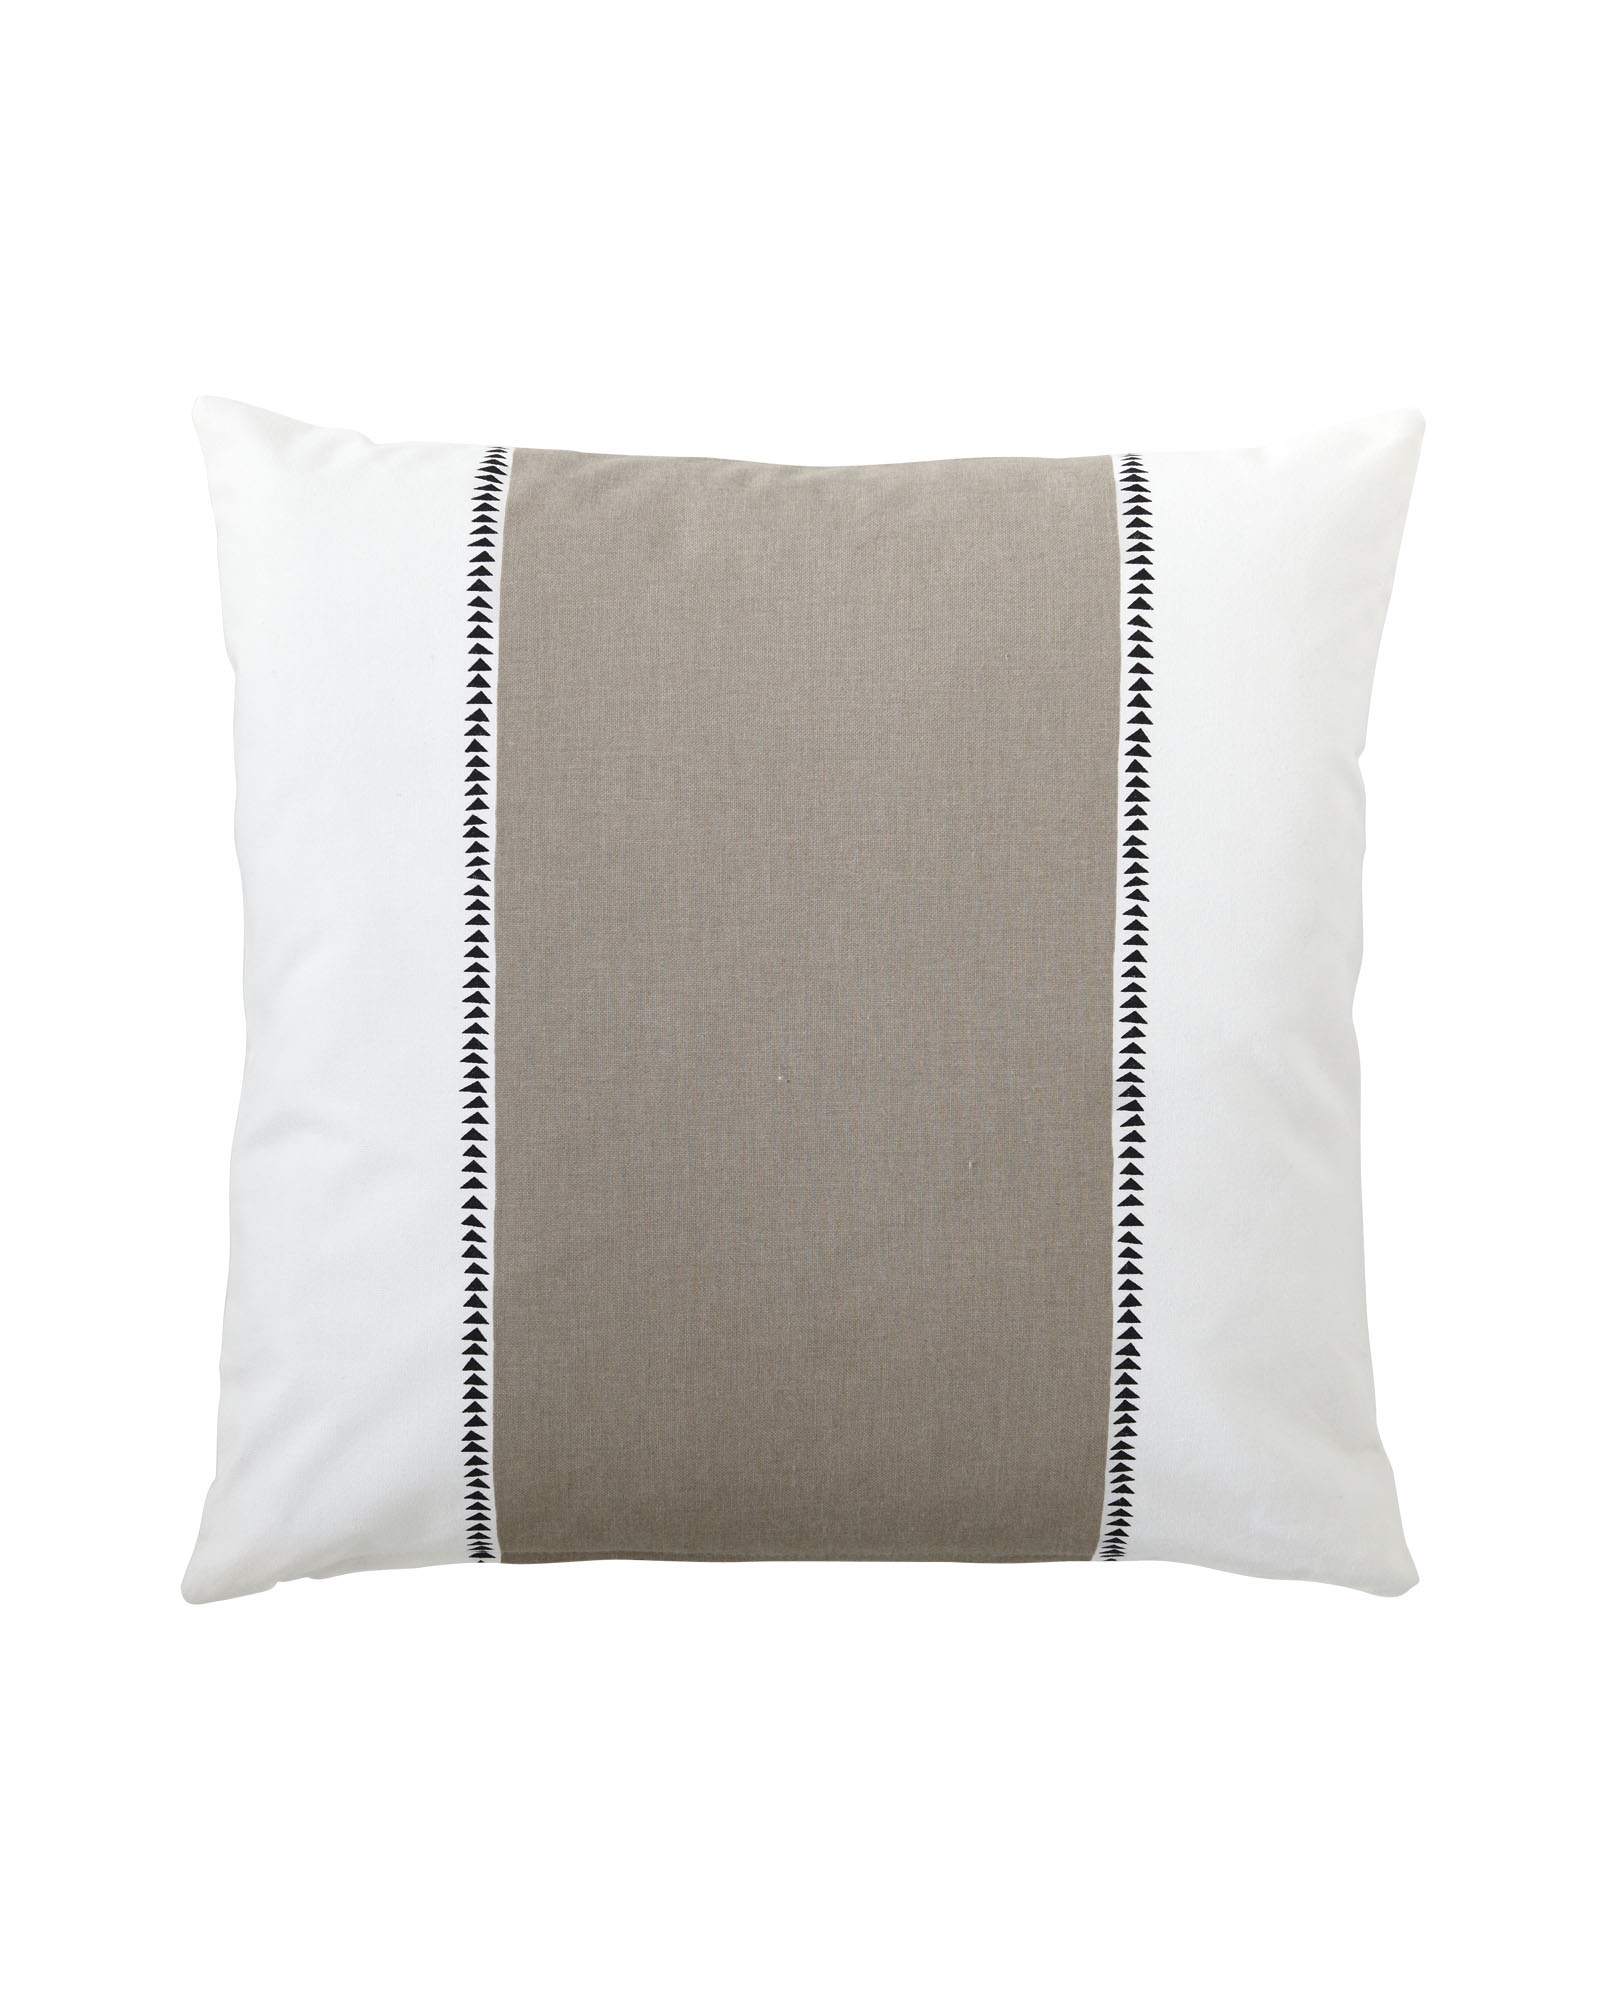 Racing Stripe Pillow Cover- 20" x 20"- Bark- Insert sold separately - Image 0